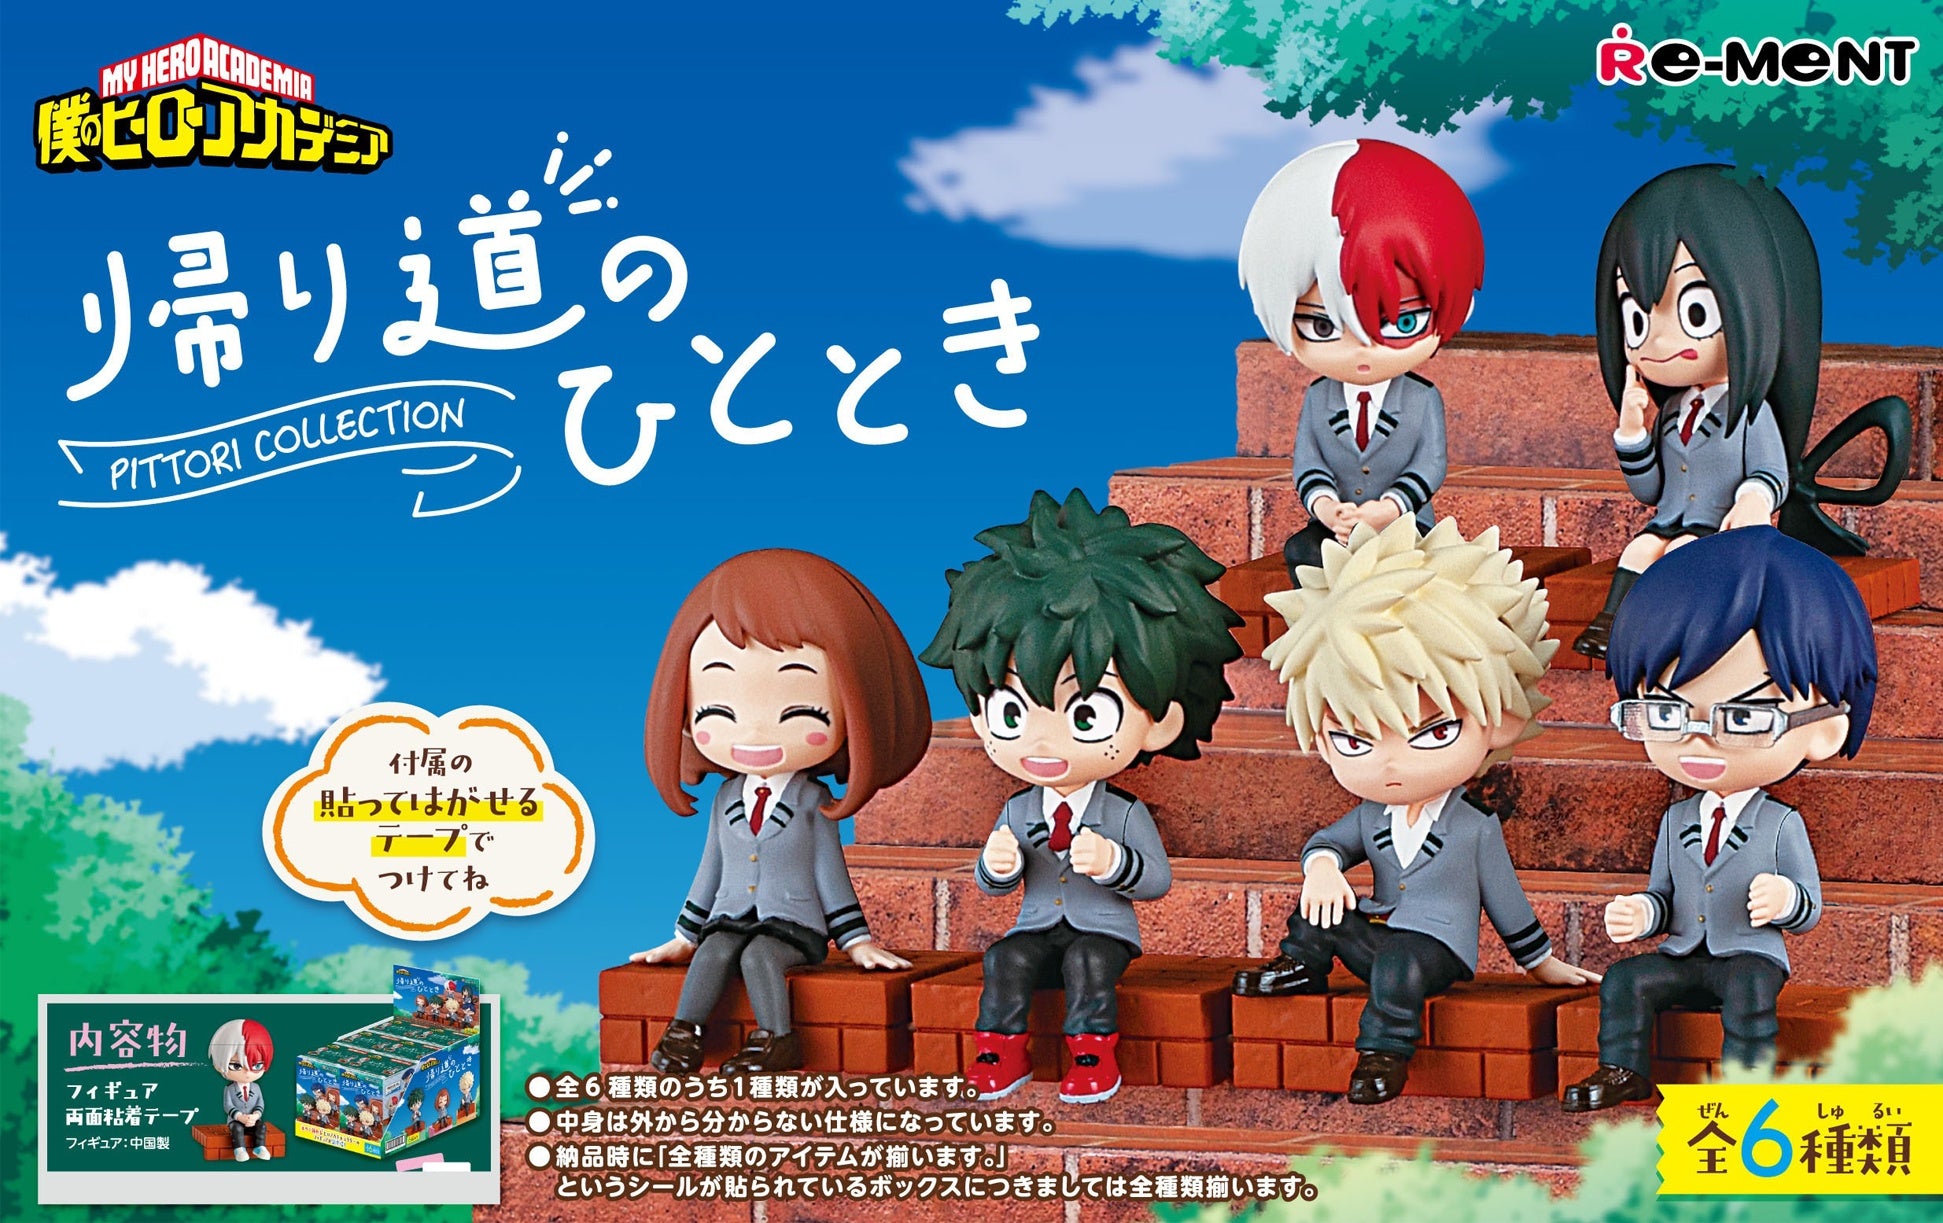 My Hero Academia: Pittori Collection A Moment On The Way Home